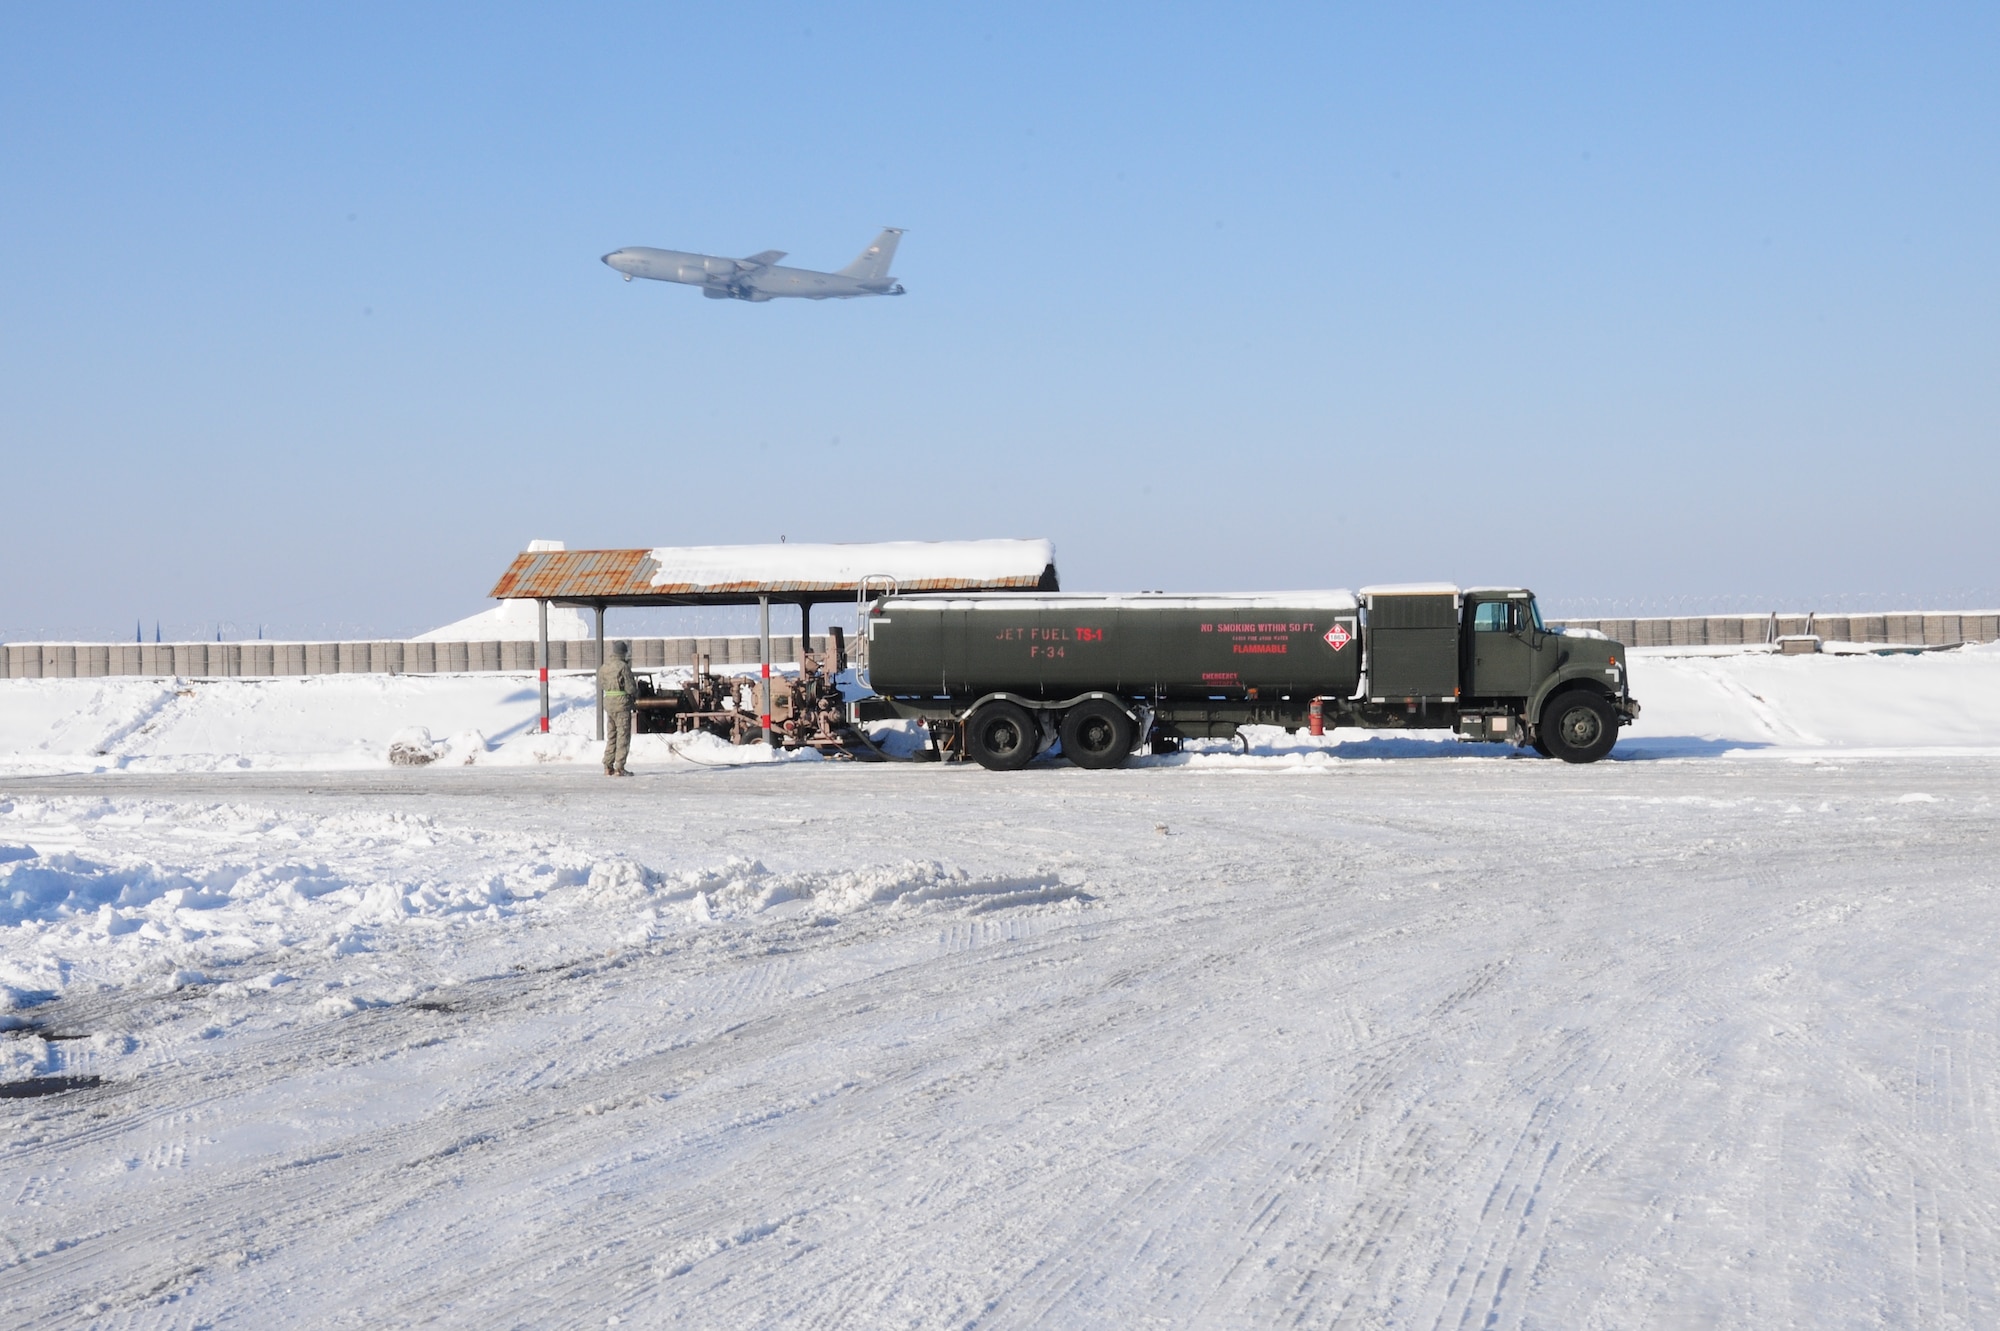 A KC-135 Stratotanker takes off at the Transit Center at Manas, Kyrgyzstan, Jan. 19, 2010.  The 376th Expeditionary Logistics Readiness Squadron petroleum, oil and lubricants flight here was the first in the AOR to implement a new pre-filter system for fuel which will save time and money and deliver better, cleaner fuel to the aircraft the KC-135 refuels. Saving both money and time, it’s a simple process, but it has a huge impact considering that the tankers here go through several thousand gallons a day. This air-to-air refueling is what allows coalition aircraft to stay in the fight over Afghanistan. (U.S. Air Force photo/Senior Airman Nichelle Anderson/Released)